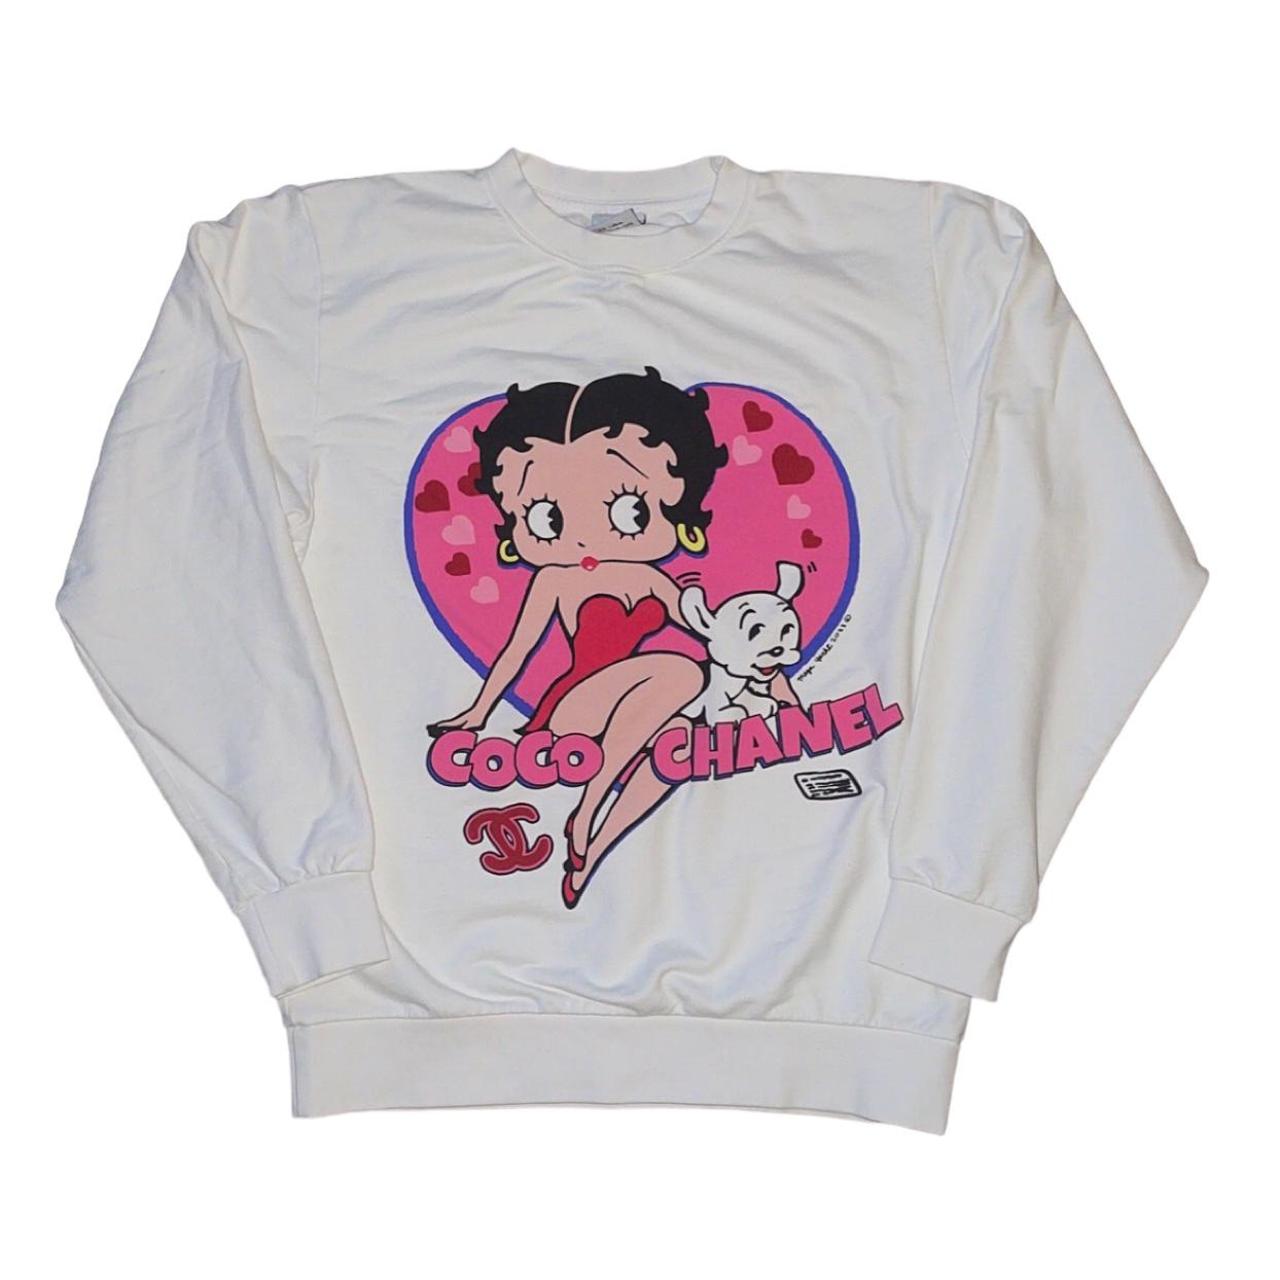 ✿ mega yacht betty boop coco chanel graphic white